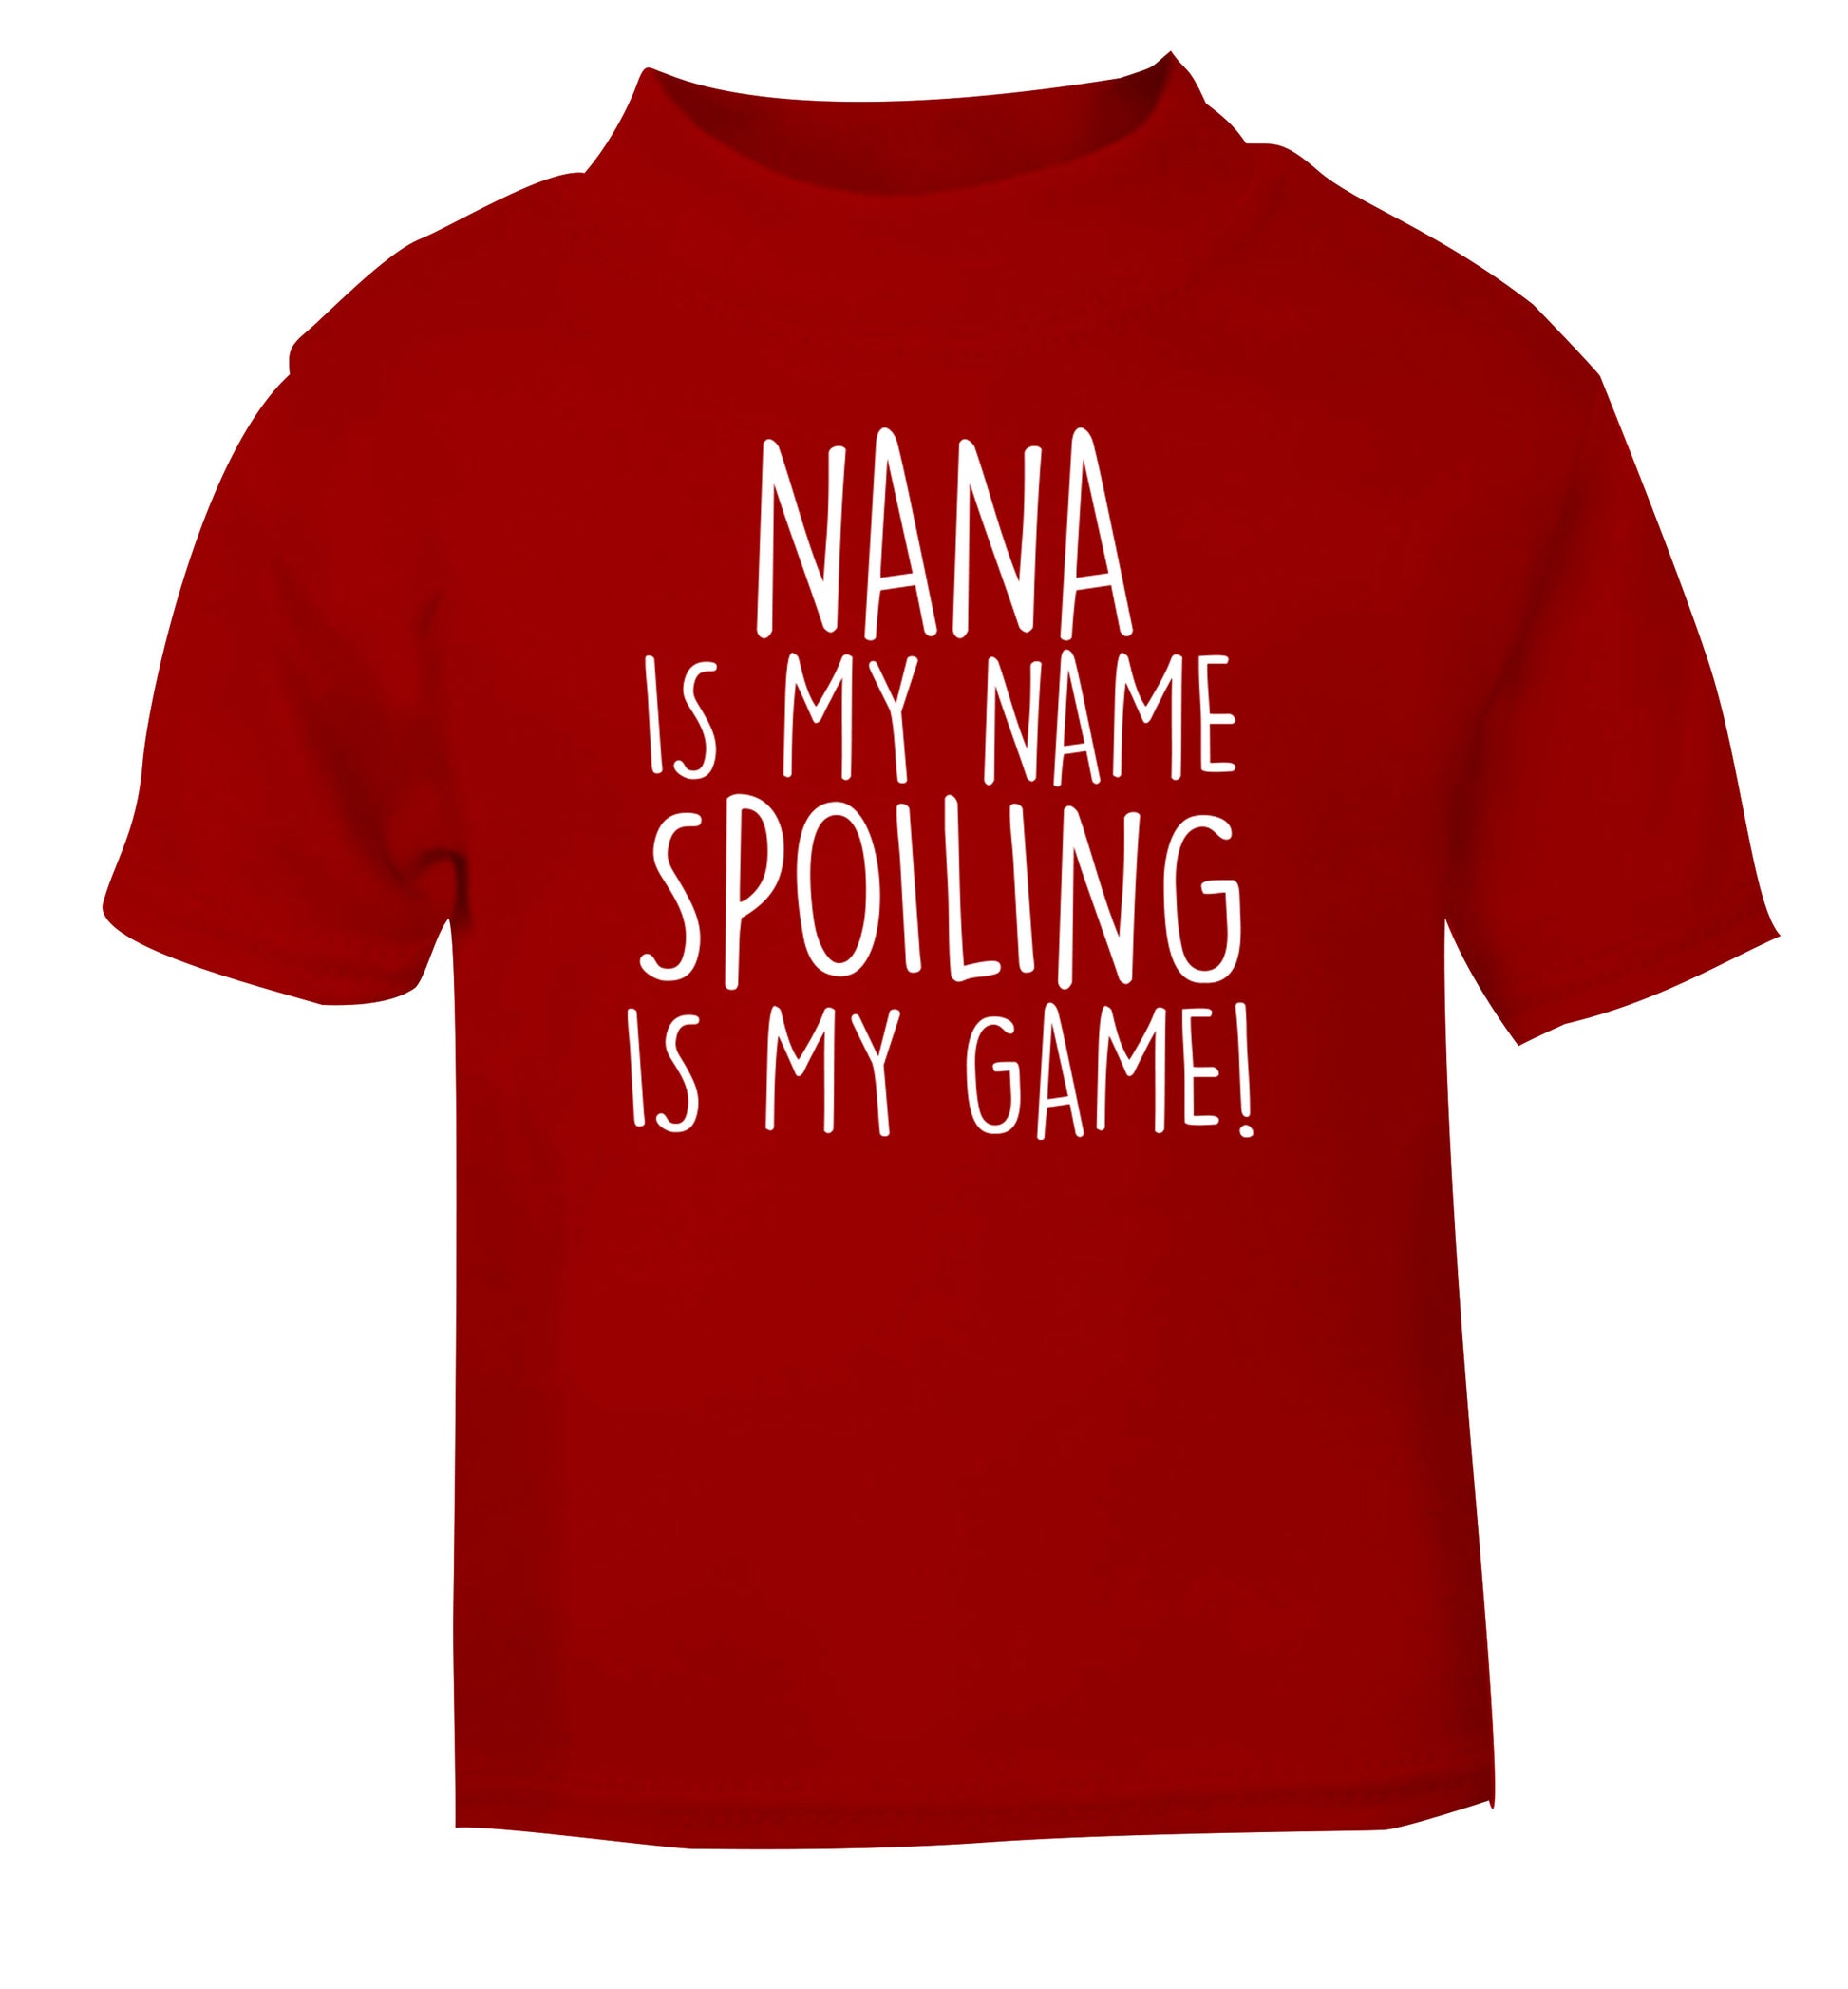 Nana is my name, spoiling is my game red Baby Toddler Tshirt 2 Years